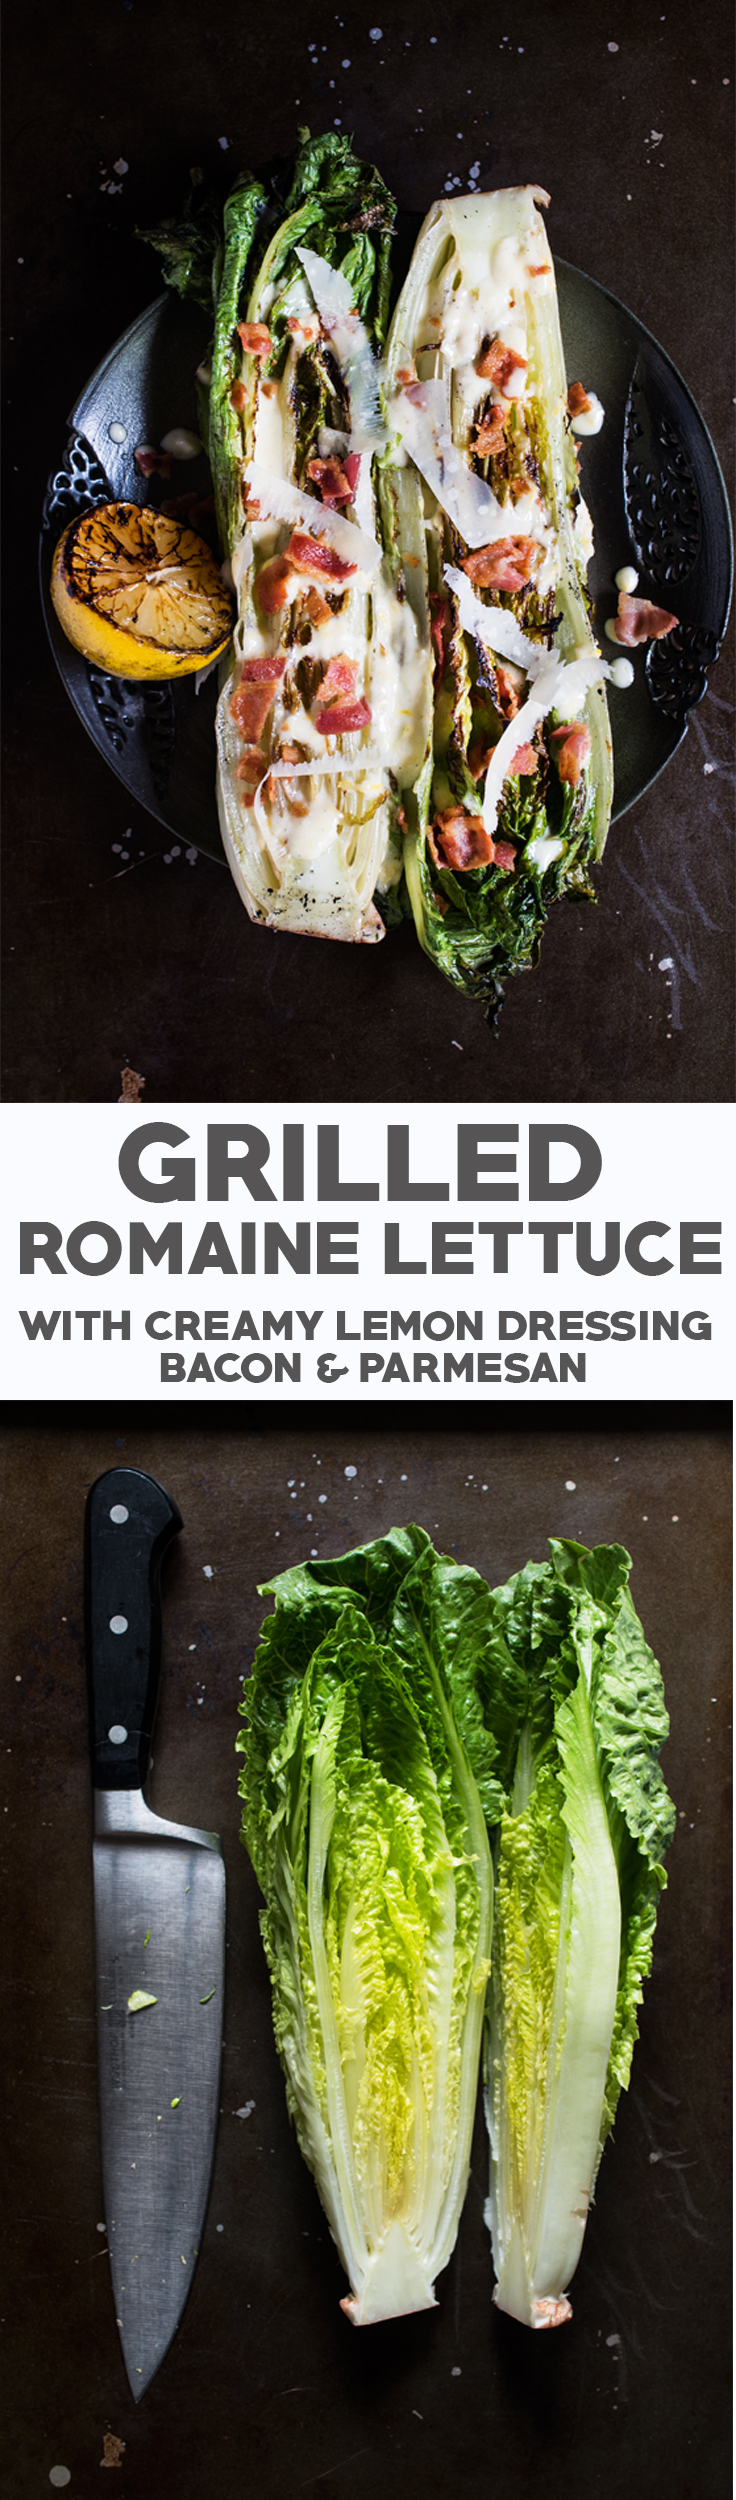 Char grilled romaine hearts, tangy dressing, crispy bacon, and nutty parmesan cheese. You've got to give this Grilled Romaine Lettuce with Creamy Lemon Dressing a try! 